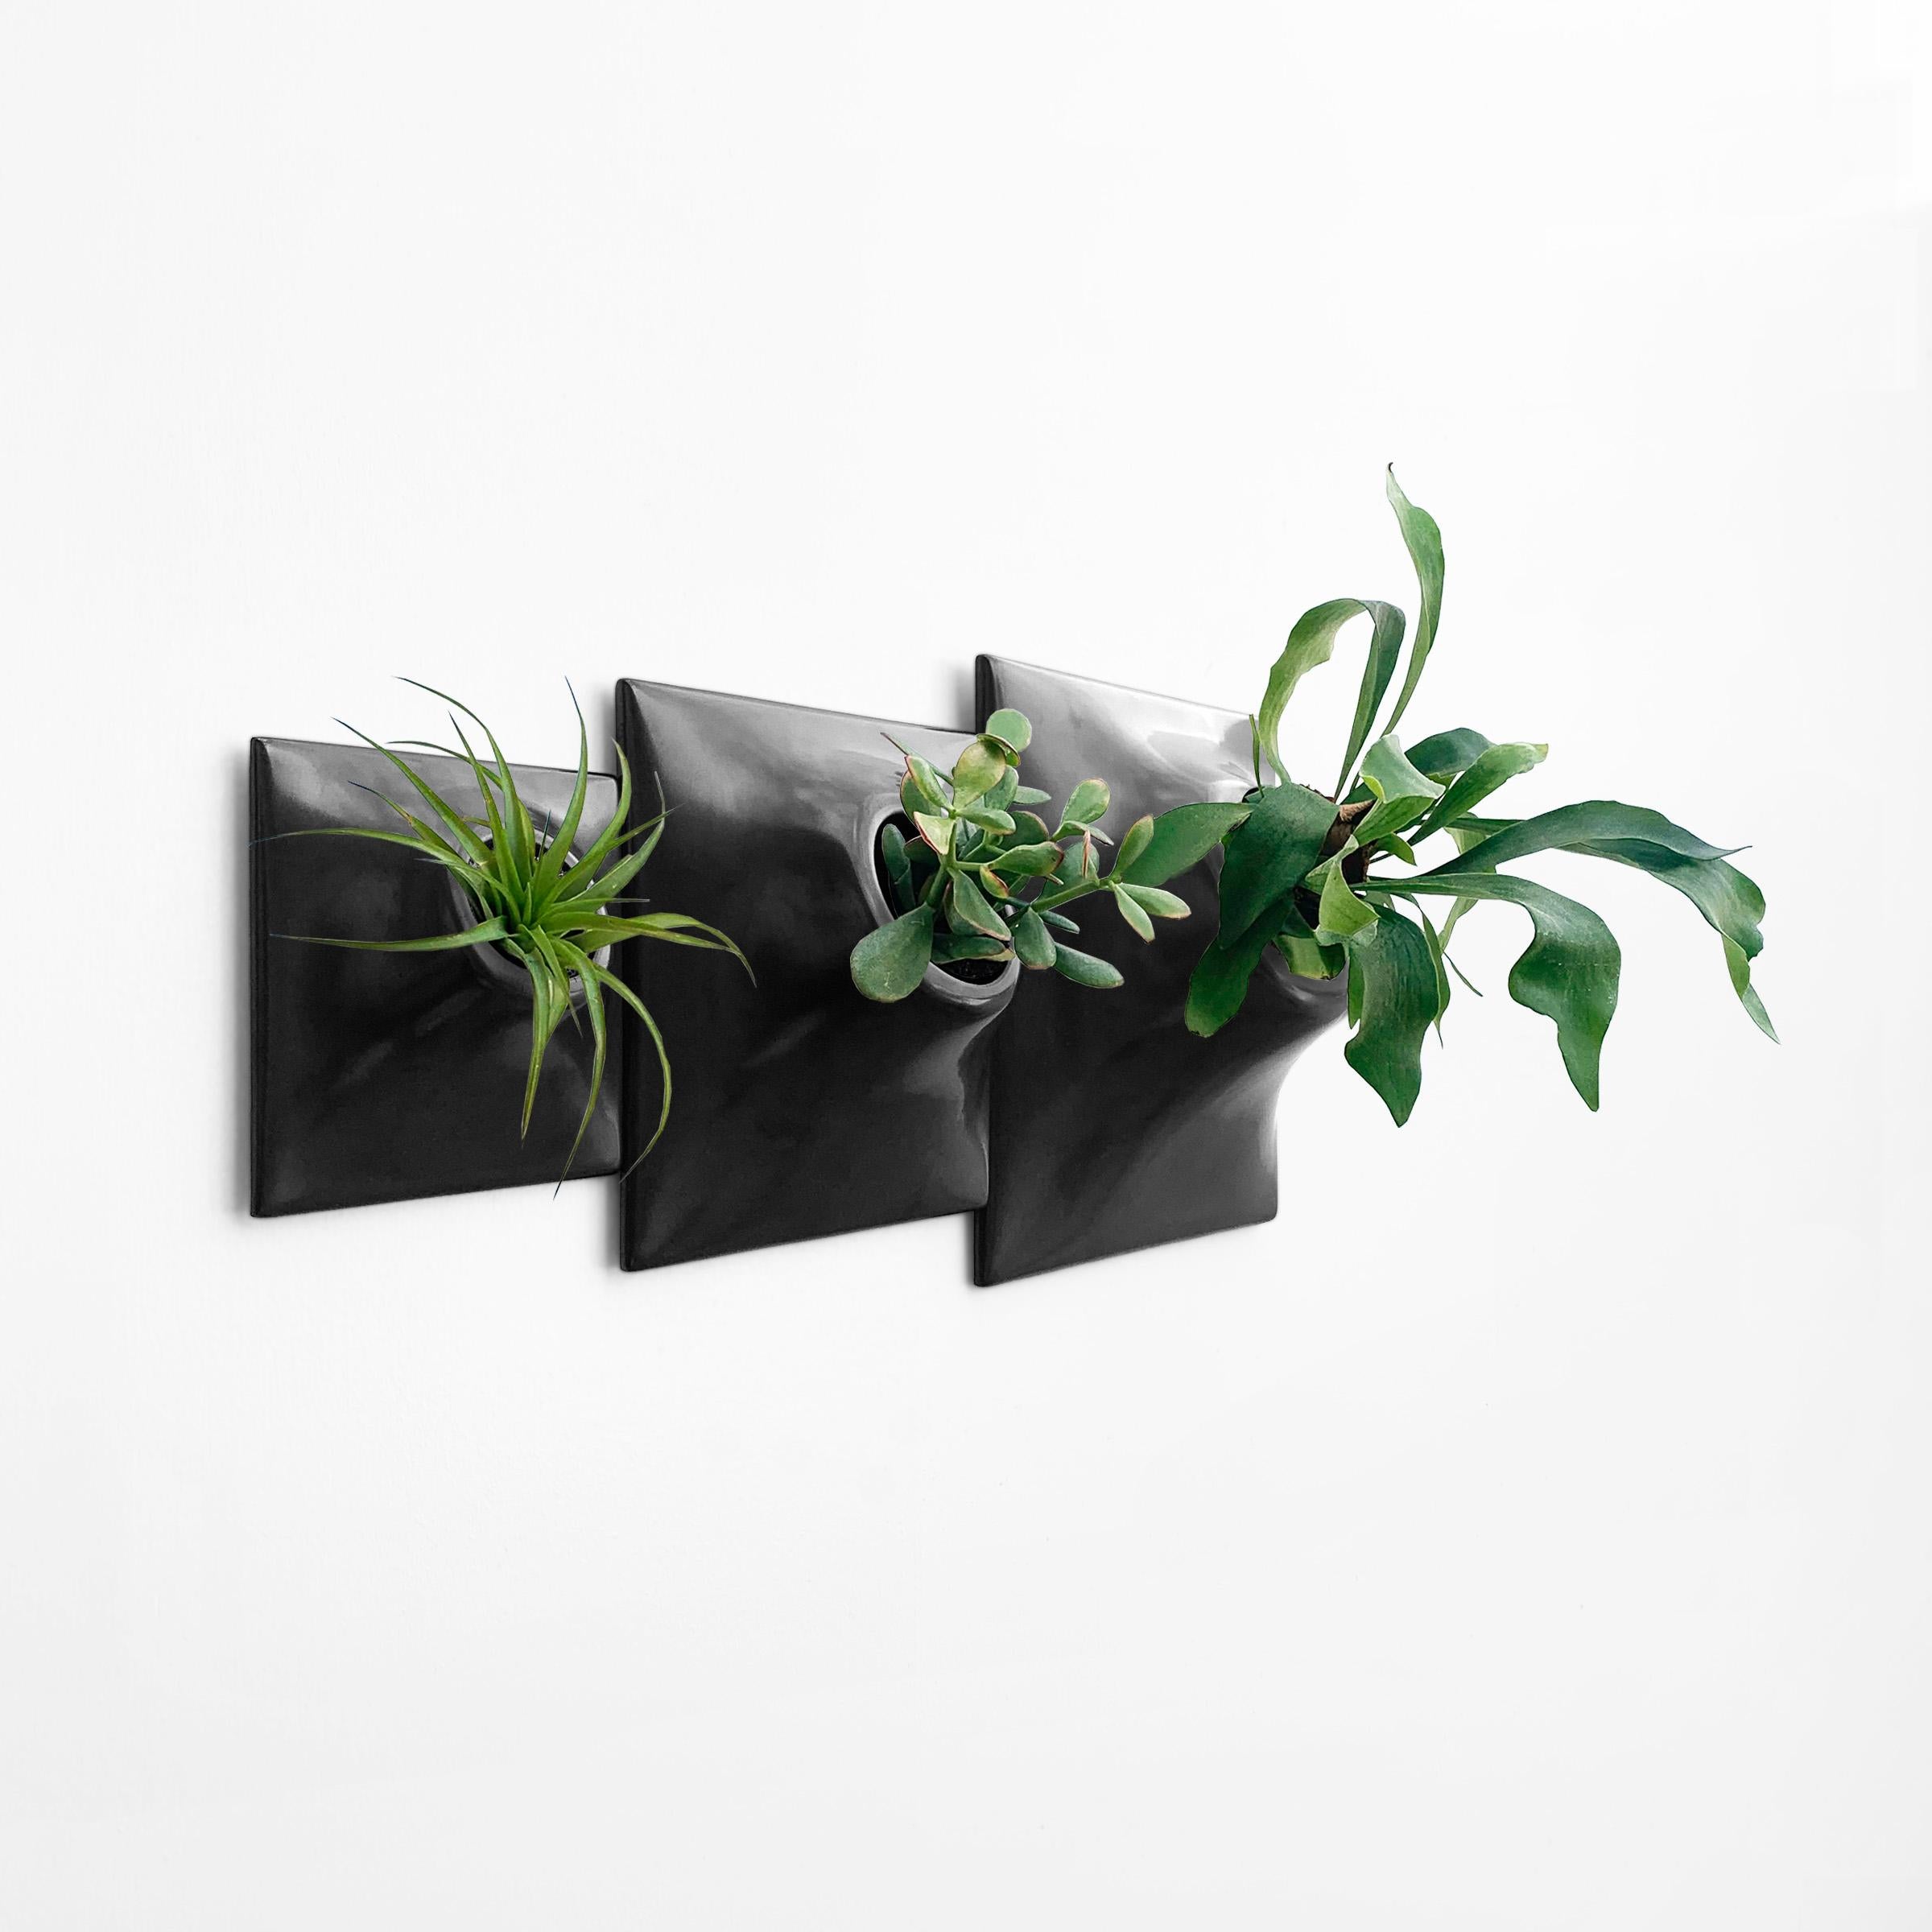 Modern Black Wall Planter Set, Mid Century Modern Decor, Plant Wall Art, Node TP

Take your modern wall art to the next level by creating a dynamic and intriguing living wall or modular plant wall in your home or office with this Node Wall Planter